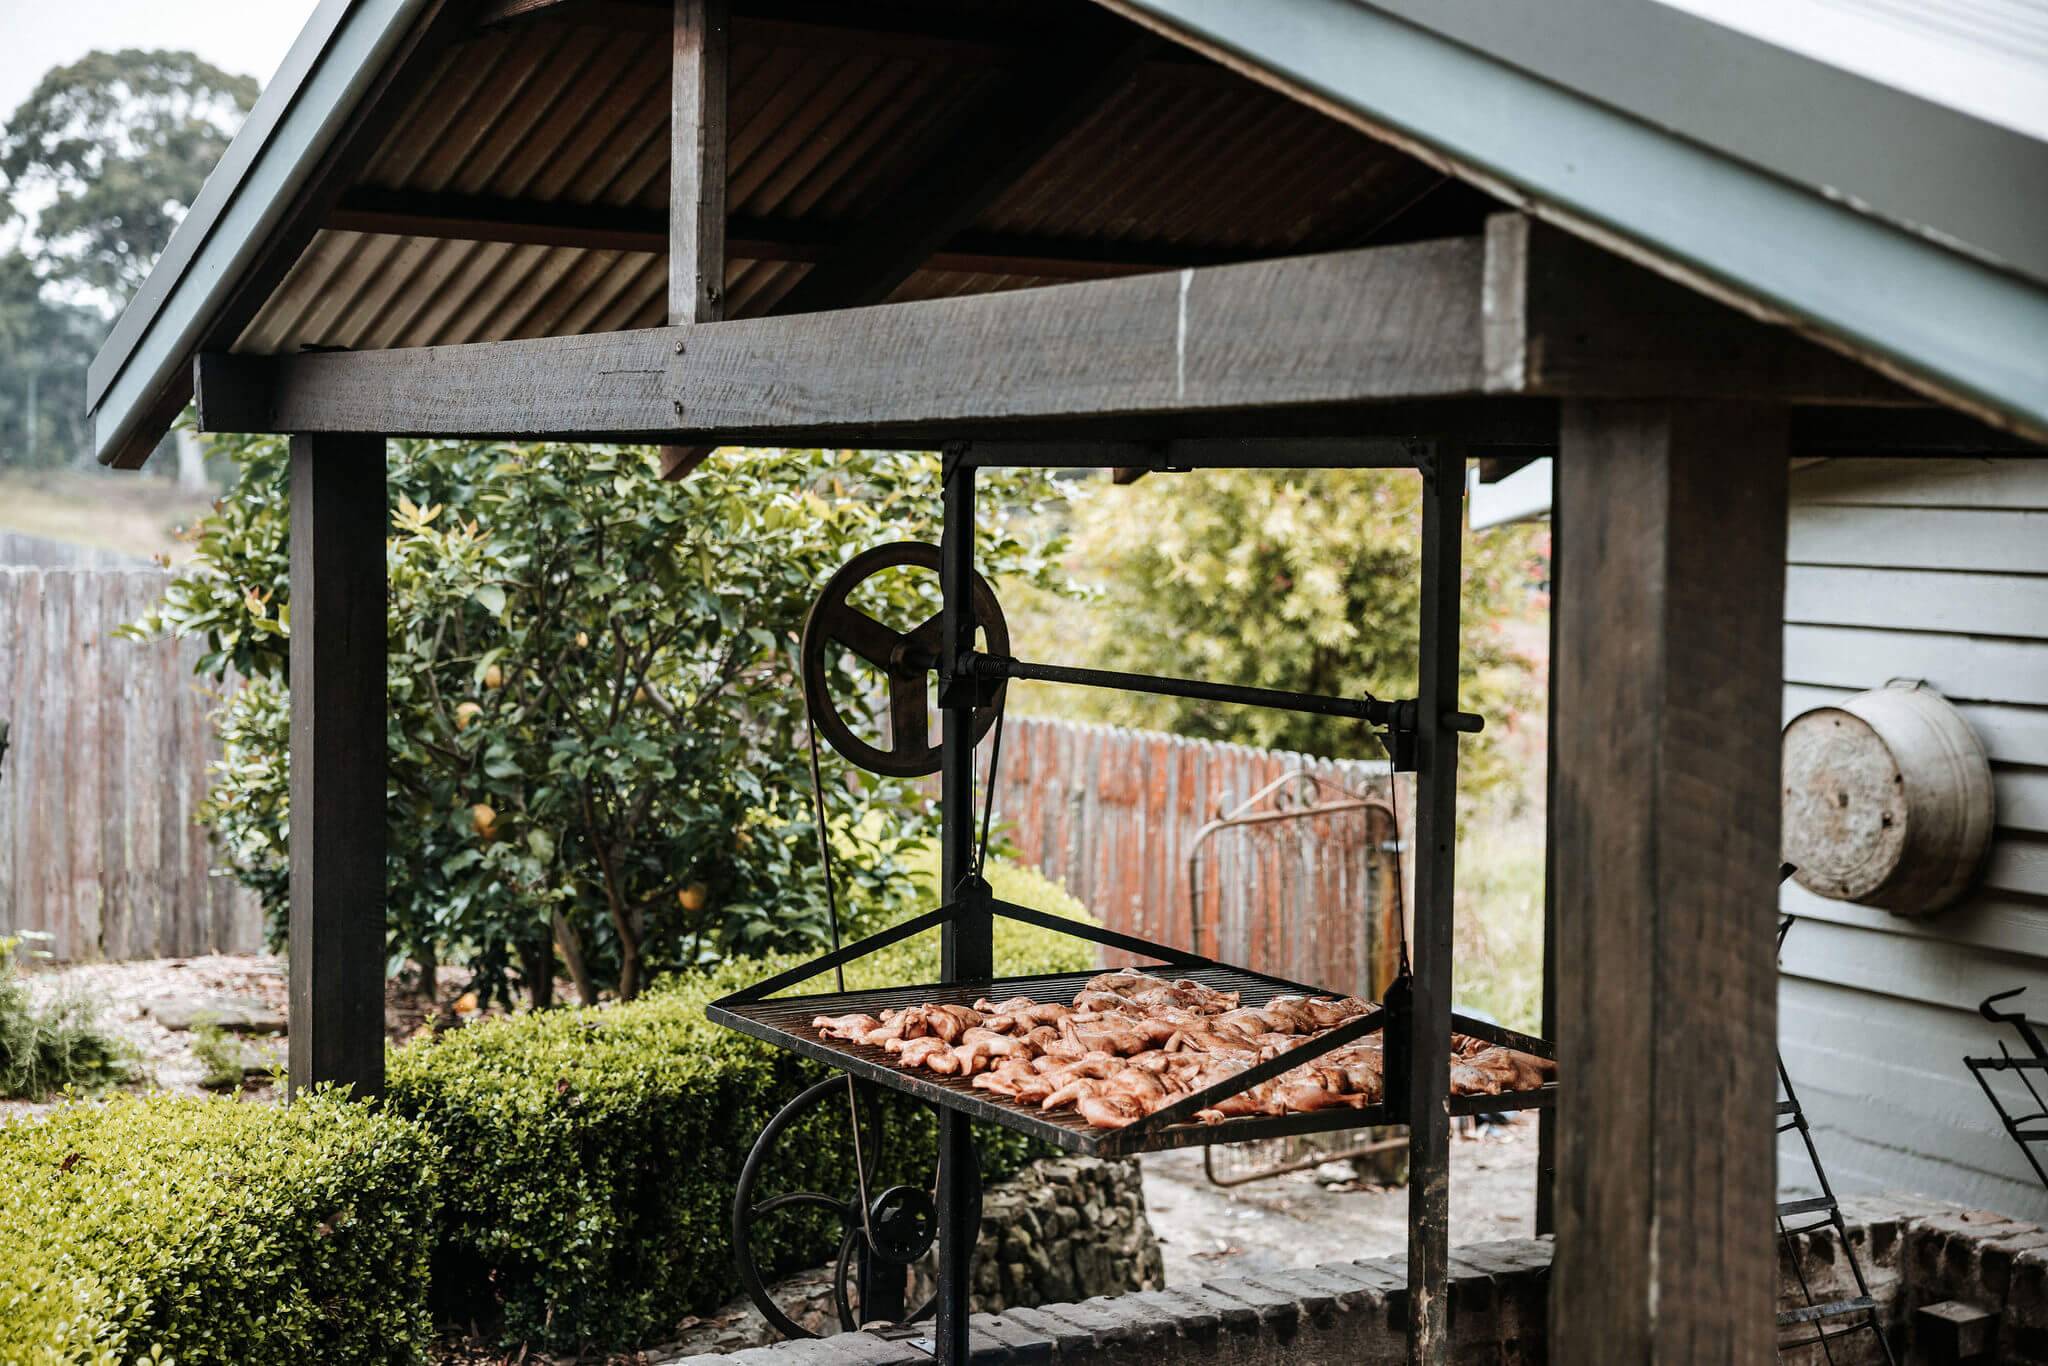 Traditional open barbecue pit with marinated chicken in an outdoor setting, prepping for a rustic wedding feast